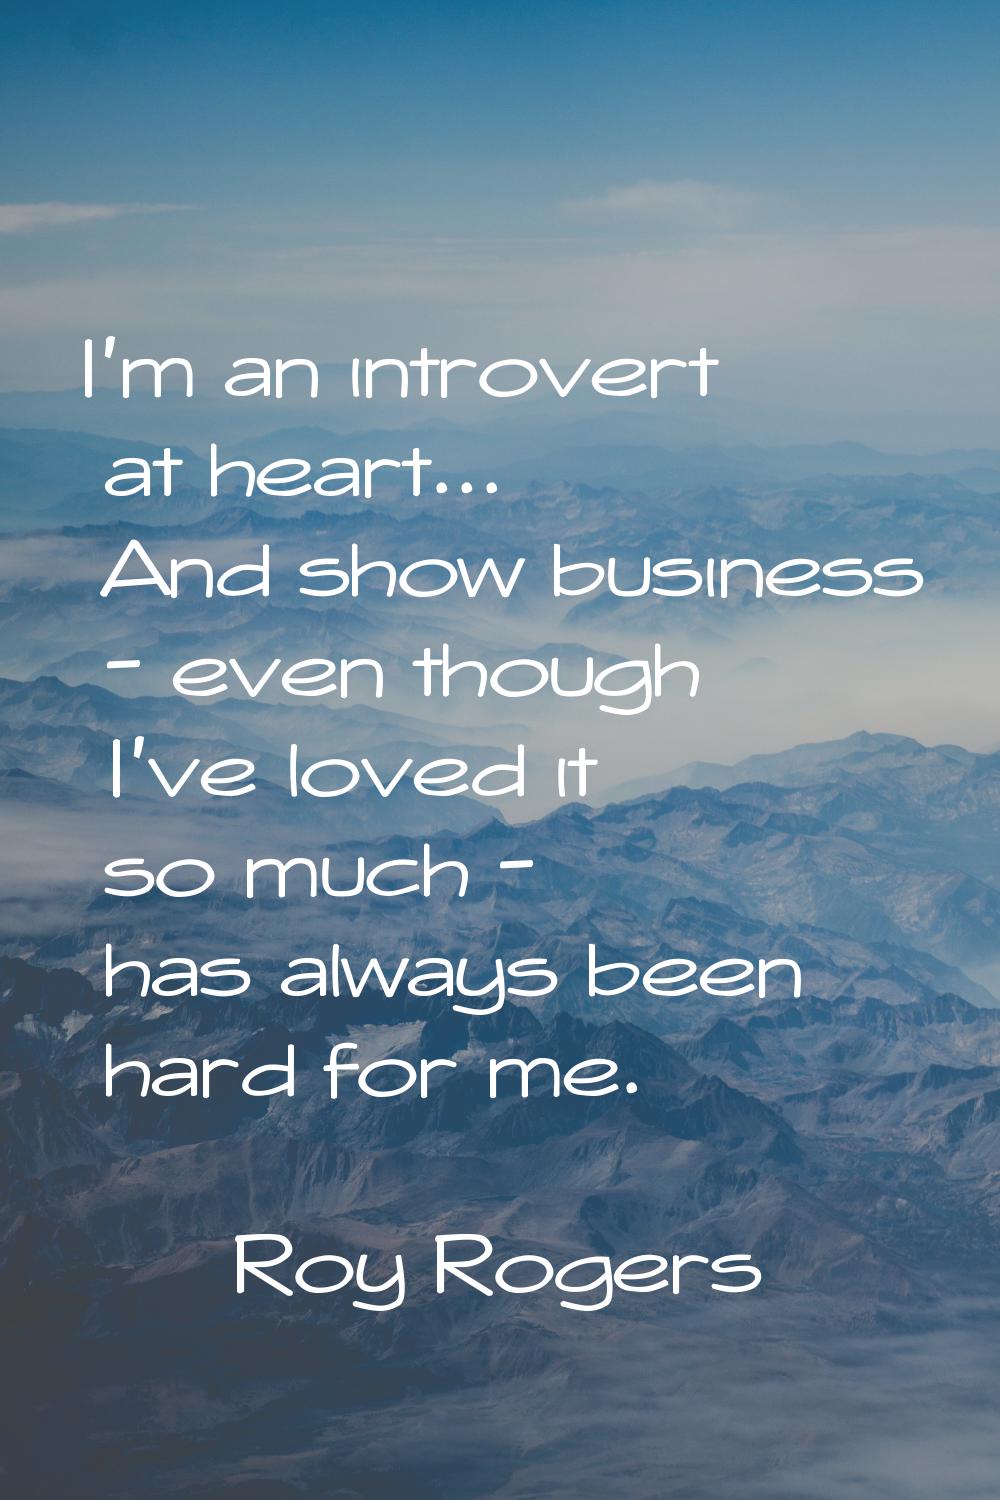 I'm an introvert at heart... And show business - even though I've loved it so much - has always bee